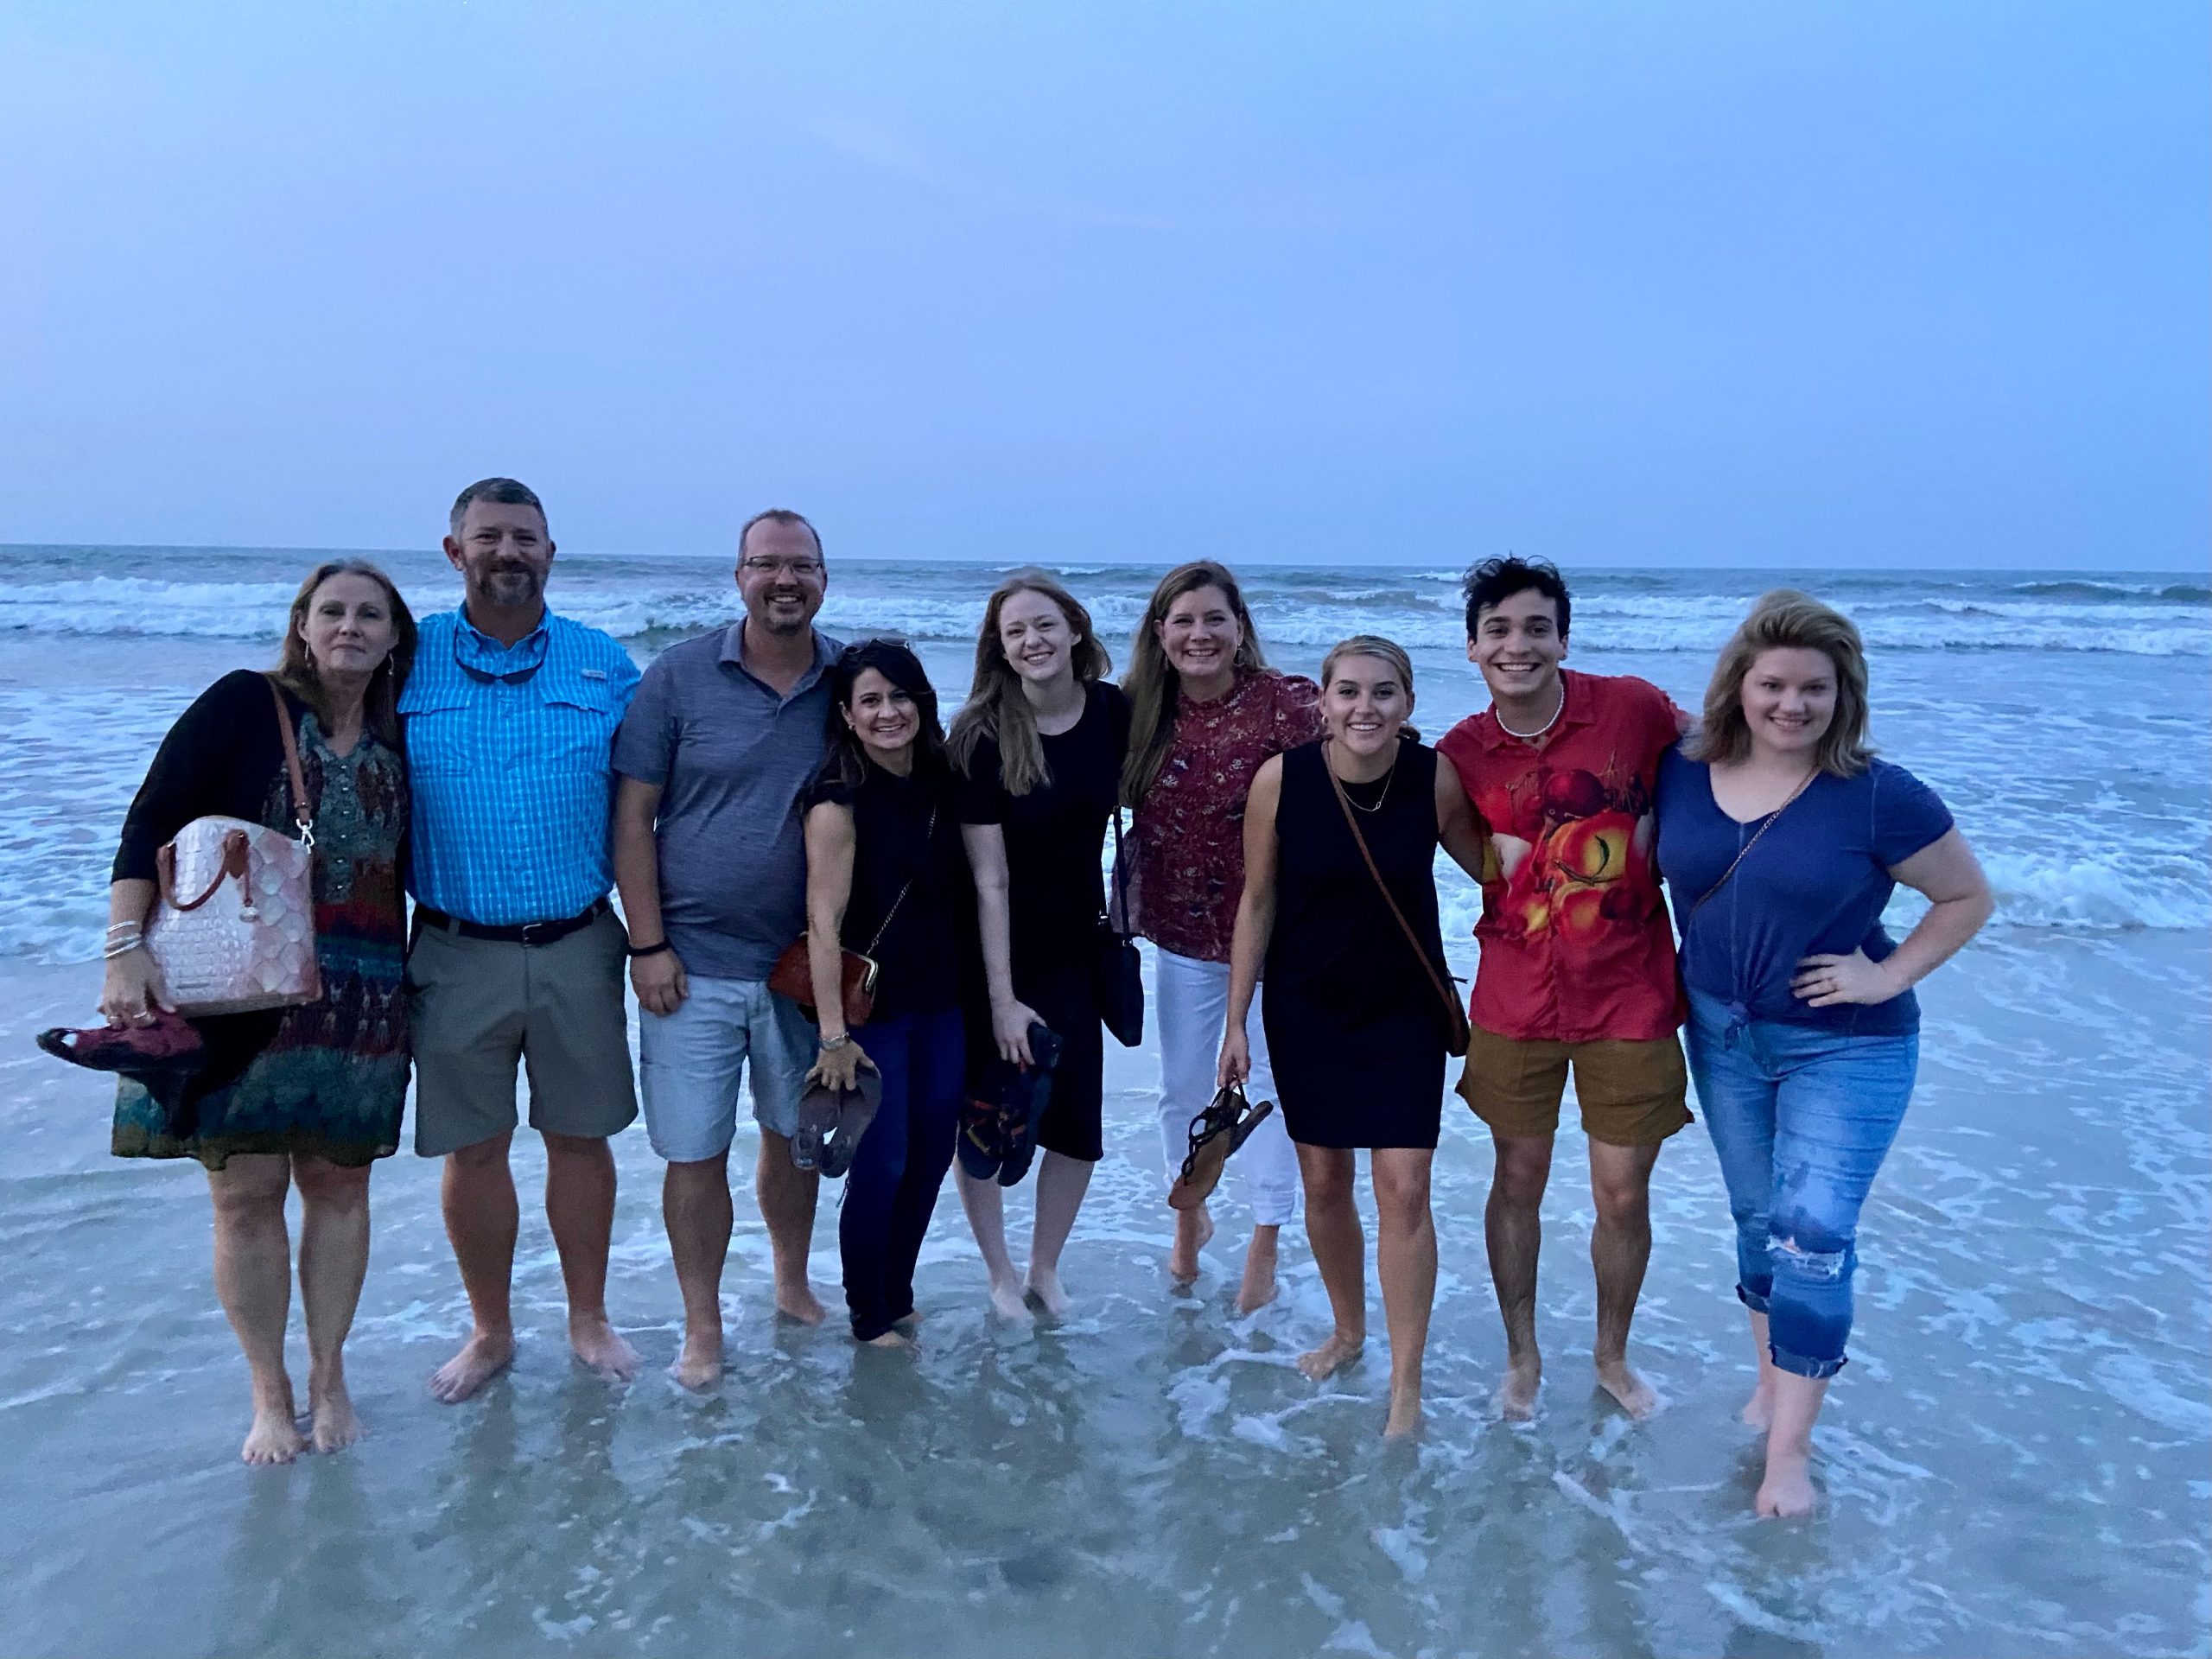 Southern communicators group at beach after day of meetings